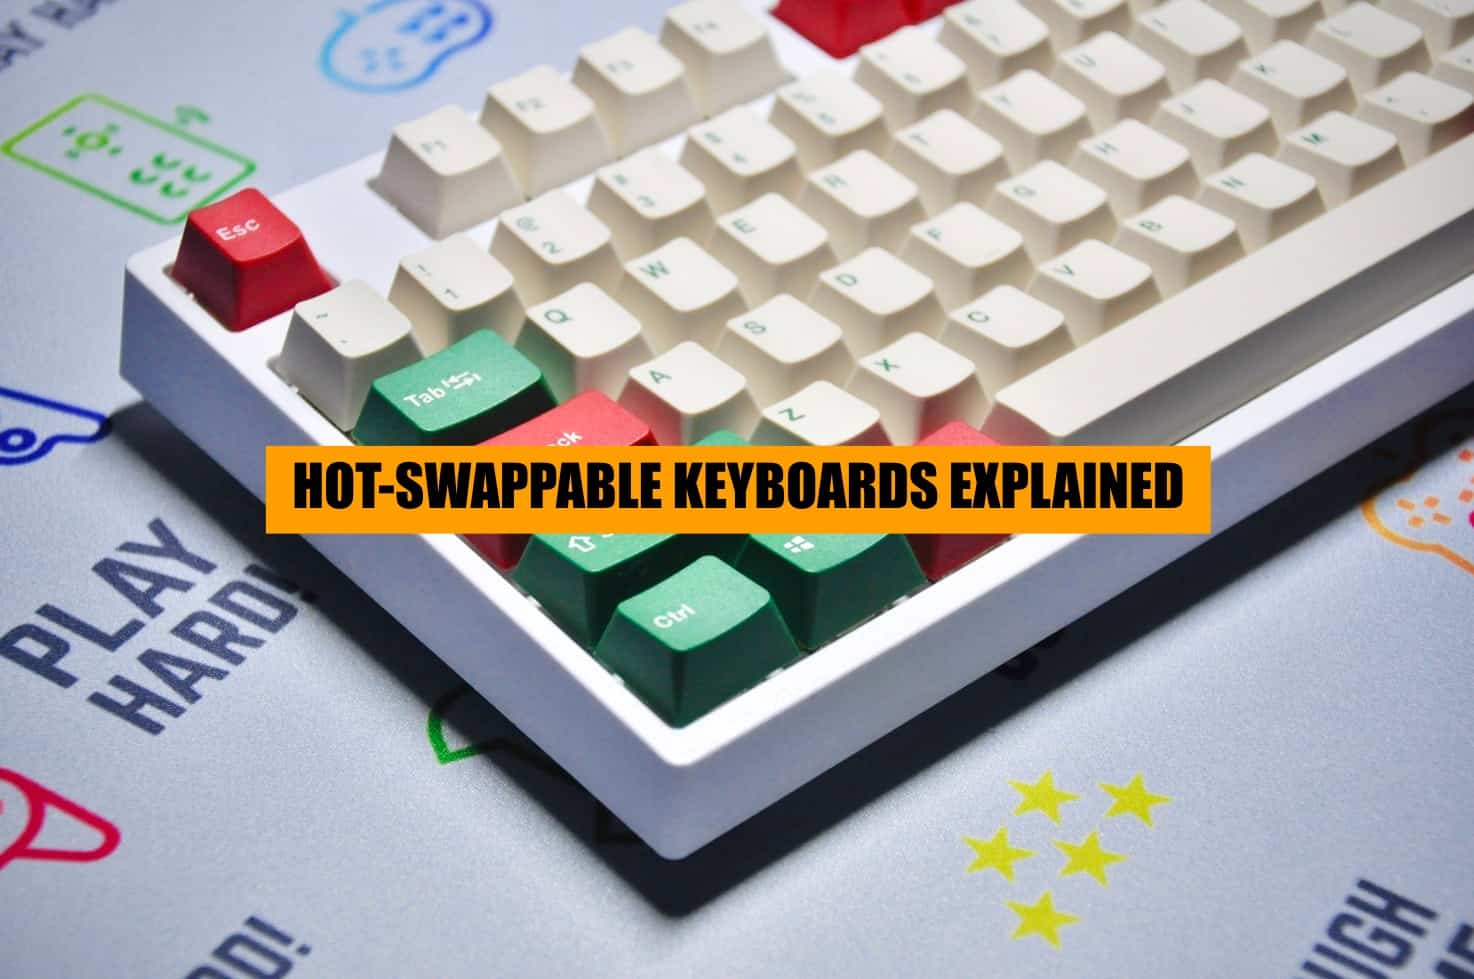 hot-swappable keyboards explained